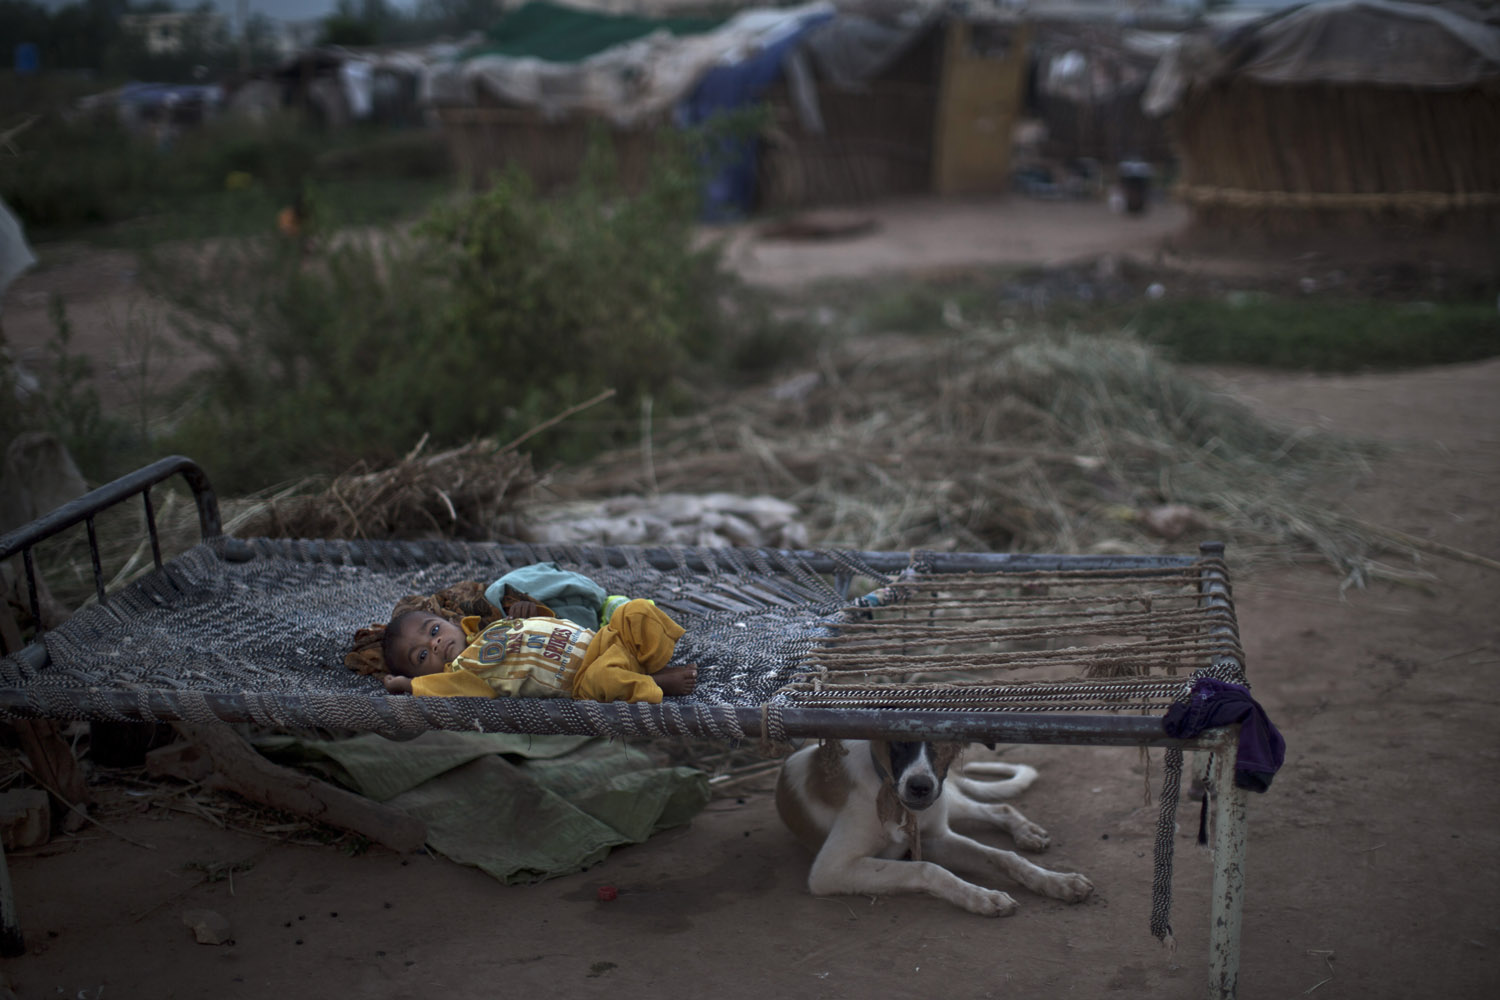 Sept. 25, 2013. A Pakistani child lies in a bed outside his family's makeshift home as a dog rests, in a slum in Islamabad. Slums built on illegal lands have neither running water or sewage disposal.